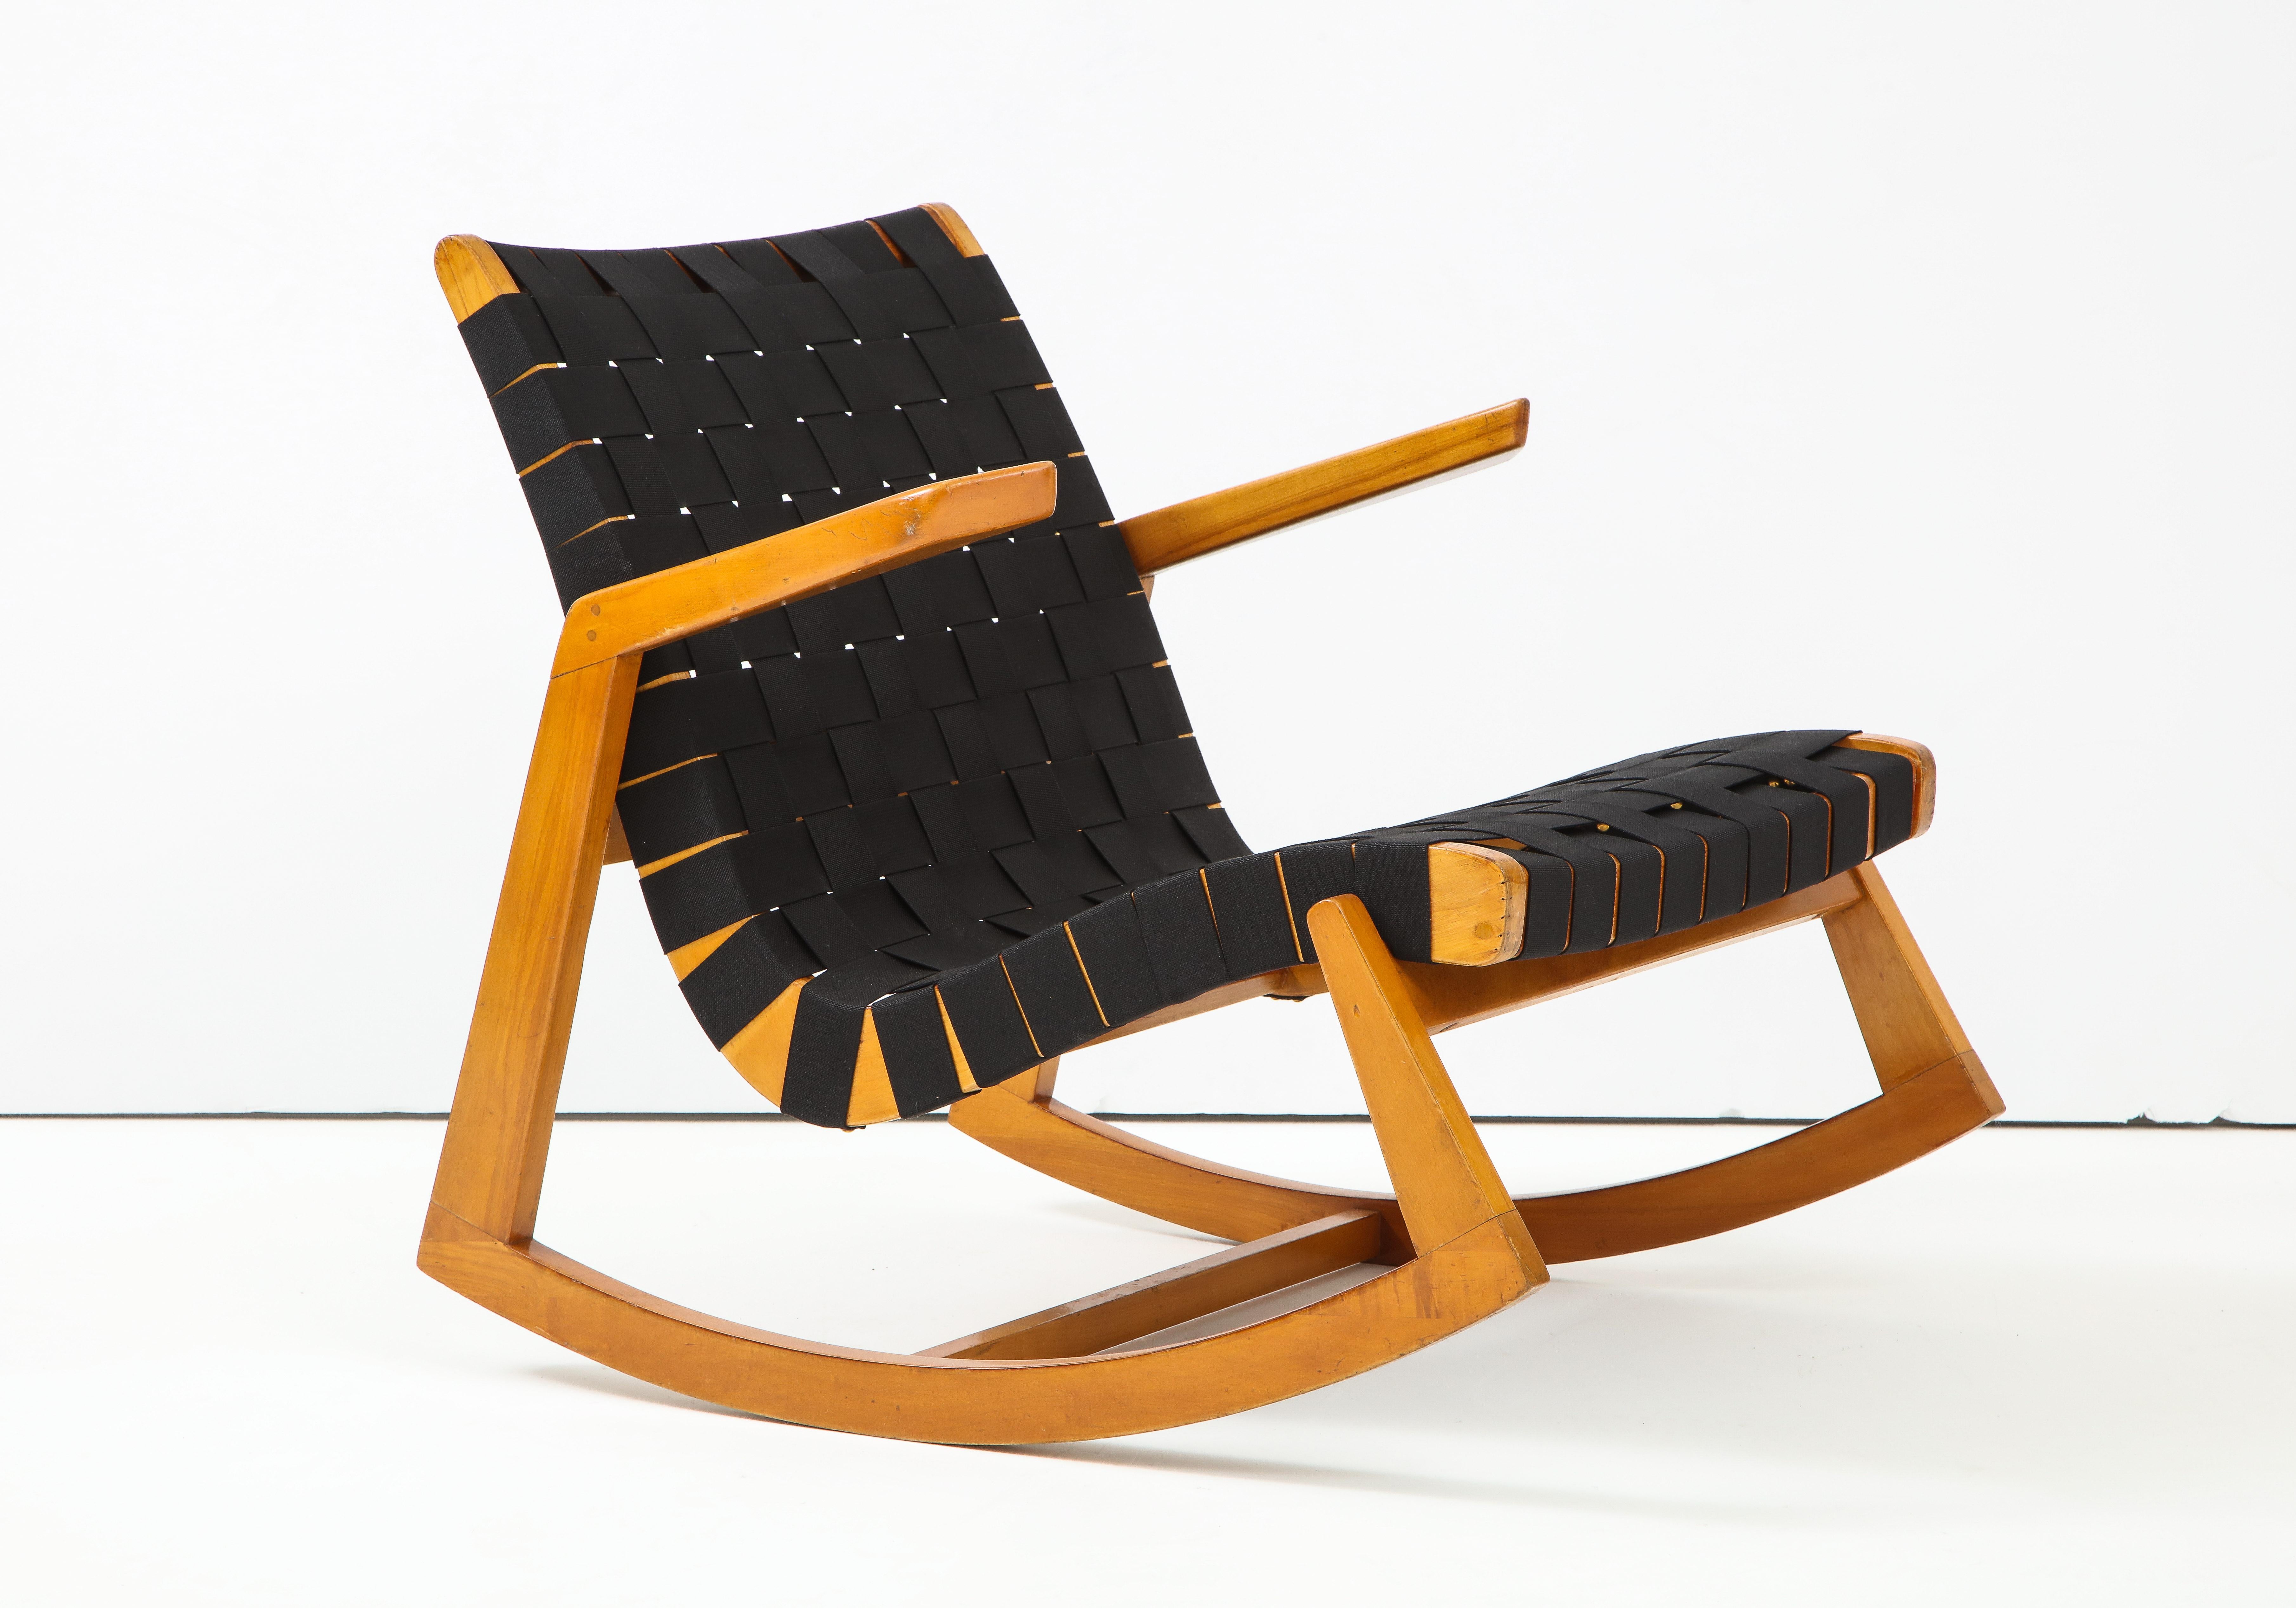 Rocker designed by Minneapolis-based architect Ralph Rapson. Part of a line of chairs designed for Knoll and produced for a short time just after WWII. Rapson was a student at Cranbrook and contemporary of Charles Eames, Florence Schust (Knoll) and